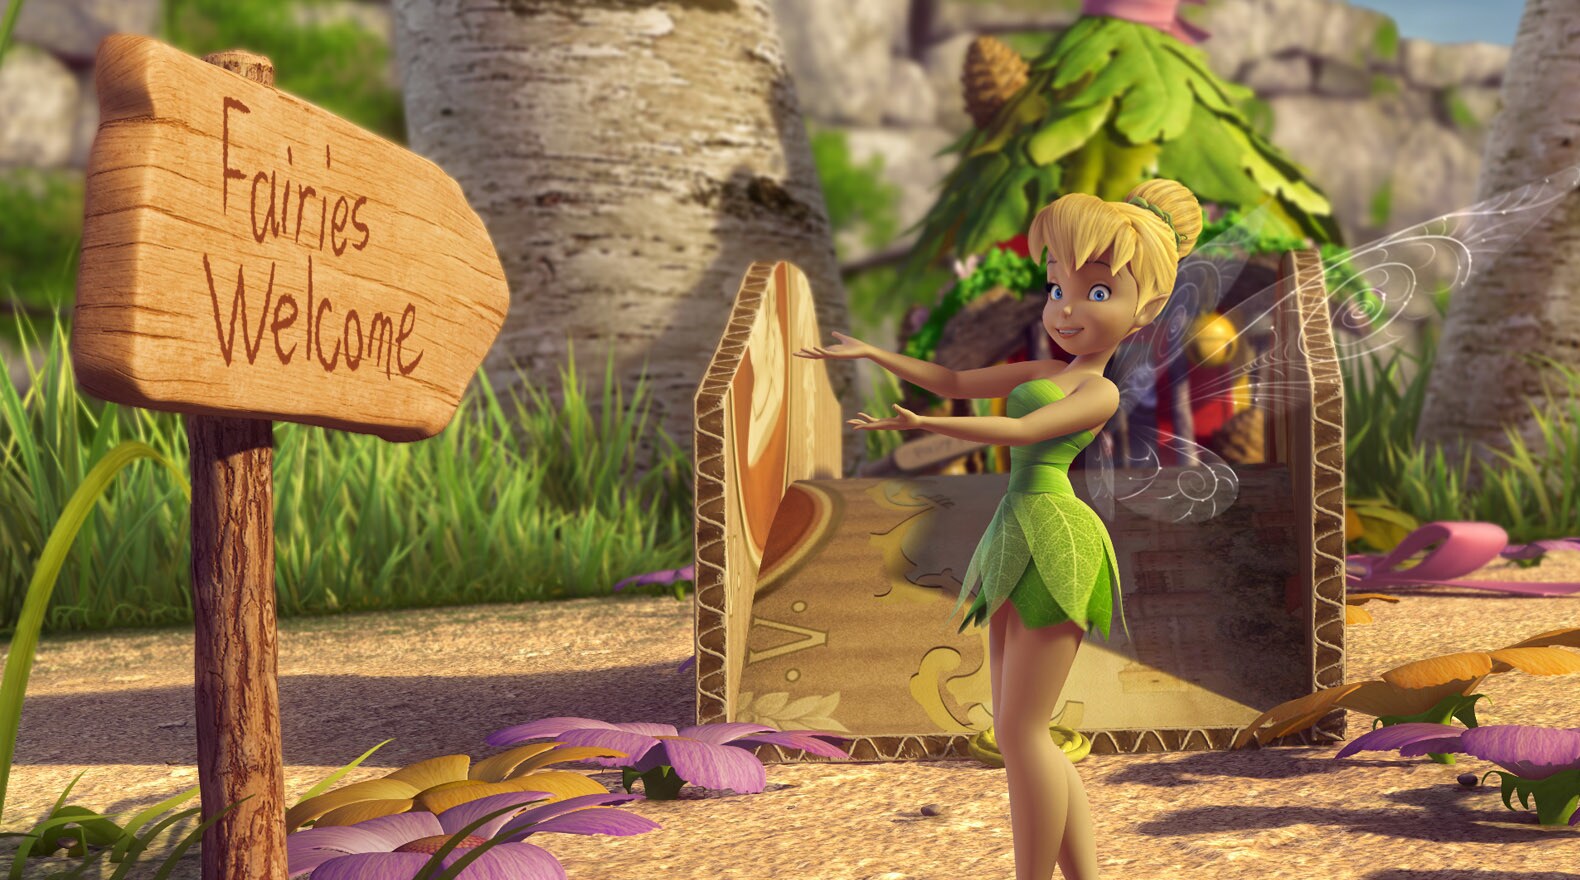 Tinker Bell takes this as a good sign to keep going.